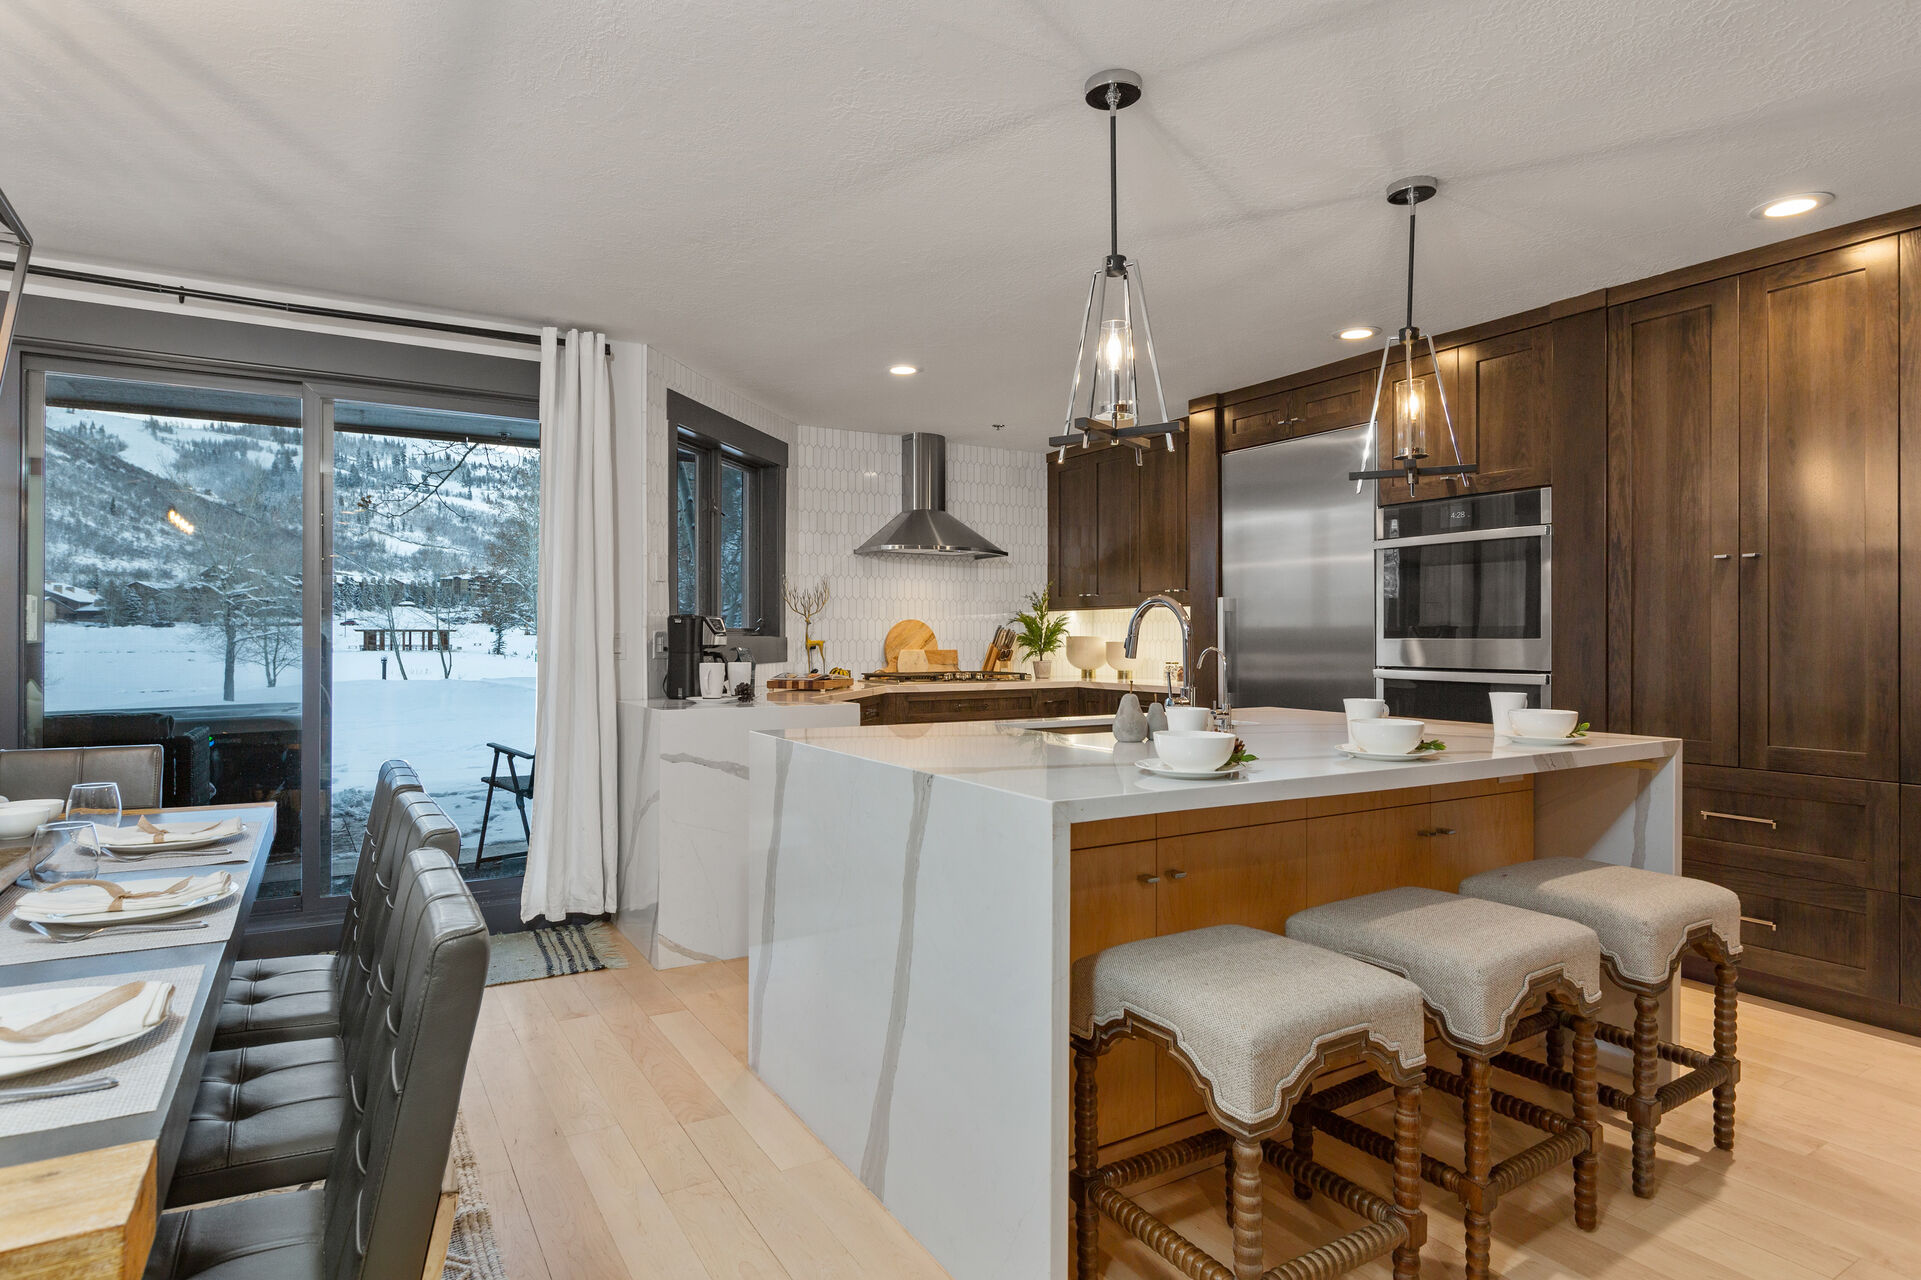 Fully Equipped Kitchen with stainless steel appliances, gorgeous stone countertops, and island seating for three